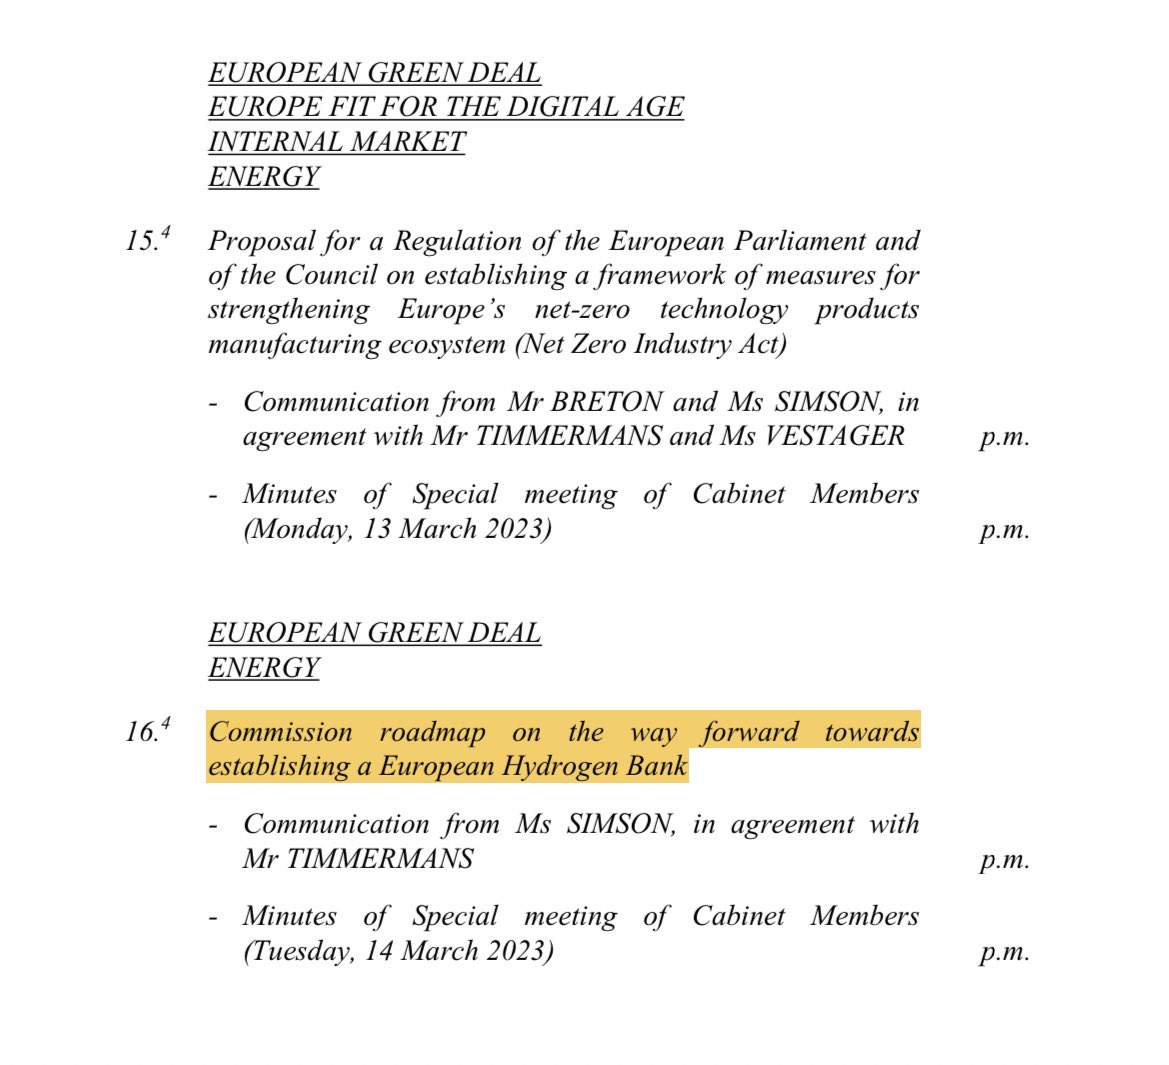 According to the @EU_Commission agenda, the EU #HydrogenBank Roadmap will be discussed in the College meeting on Thursday 16 March!